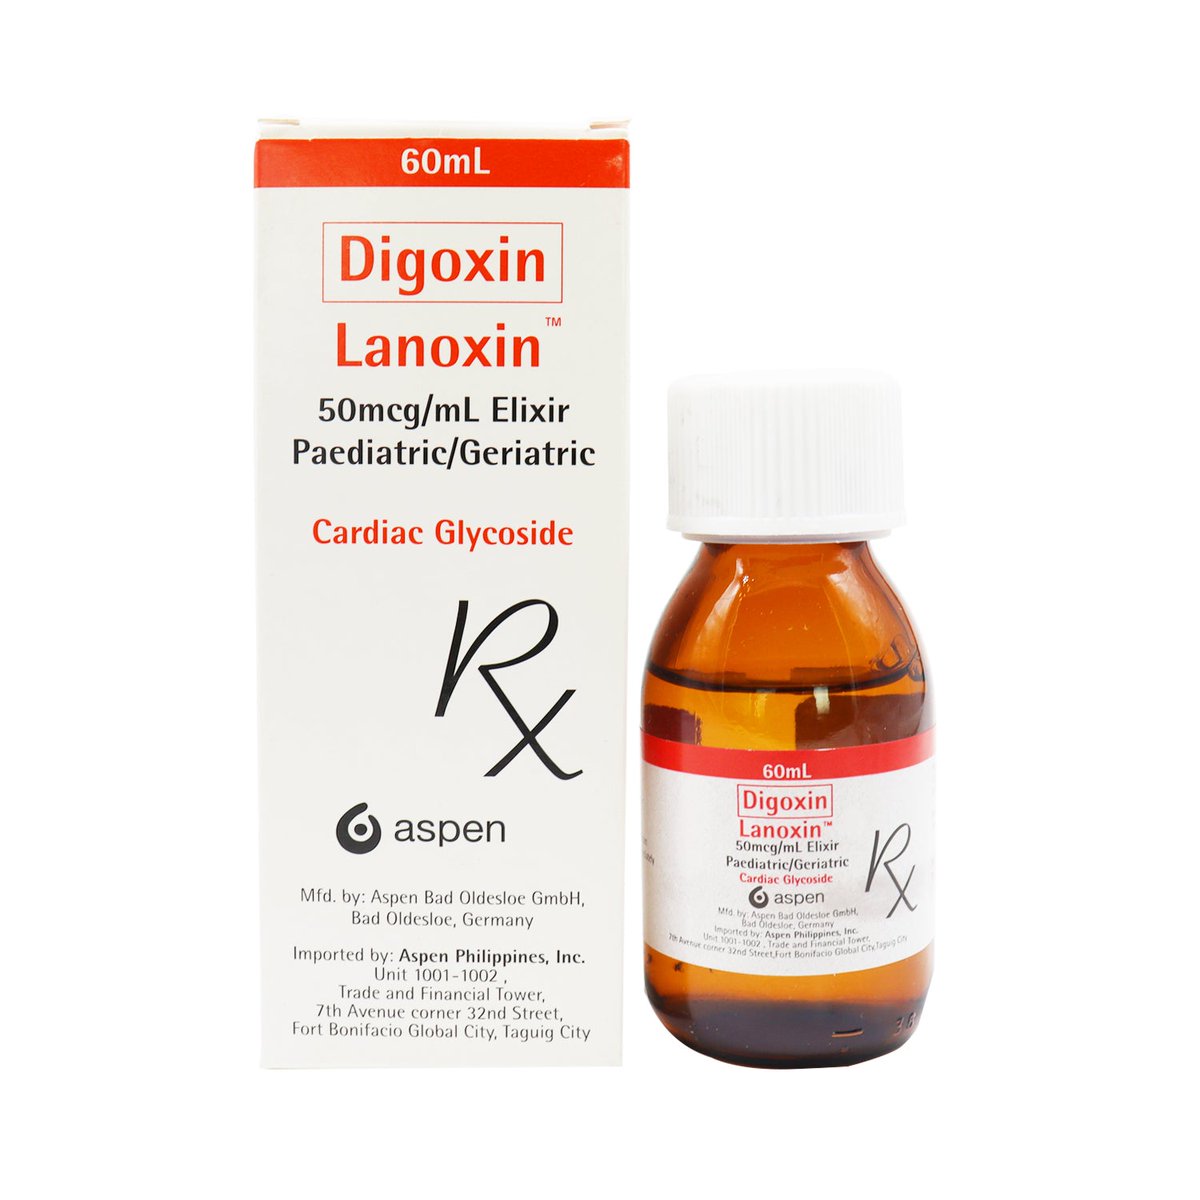 💊 Digoxin is a medication used to treat heart failure & certain arrhythmias.

🚨 One common SYMPTOM of digoxin TOXICITY is VISUAL DISTURBANCE, such as seeing halos or yellow-green-tinted vision.

#MedX #MedEd #MedTwitter #toxicity #CardioEd #CardioTwitter #ClinicalPearls